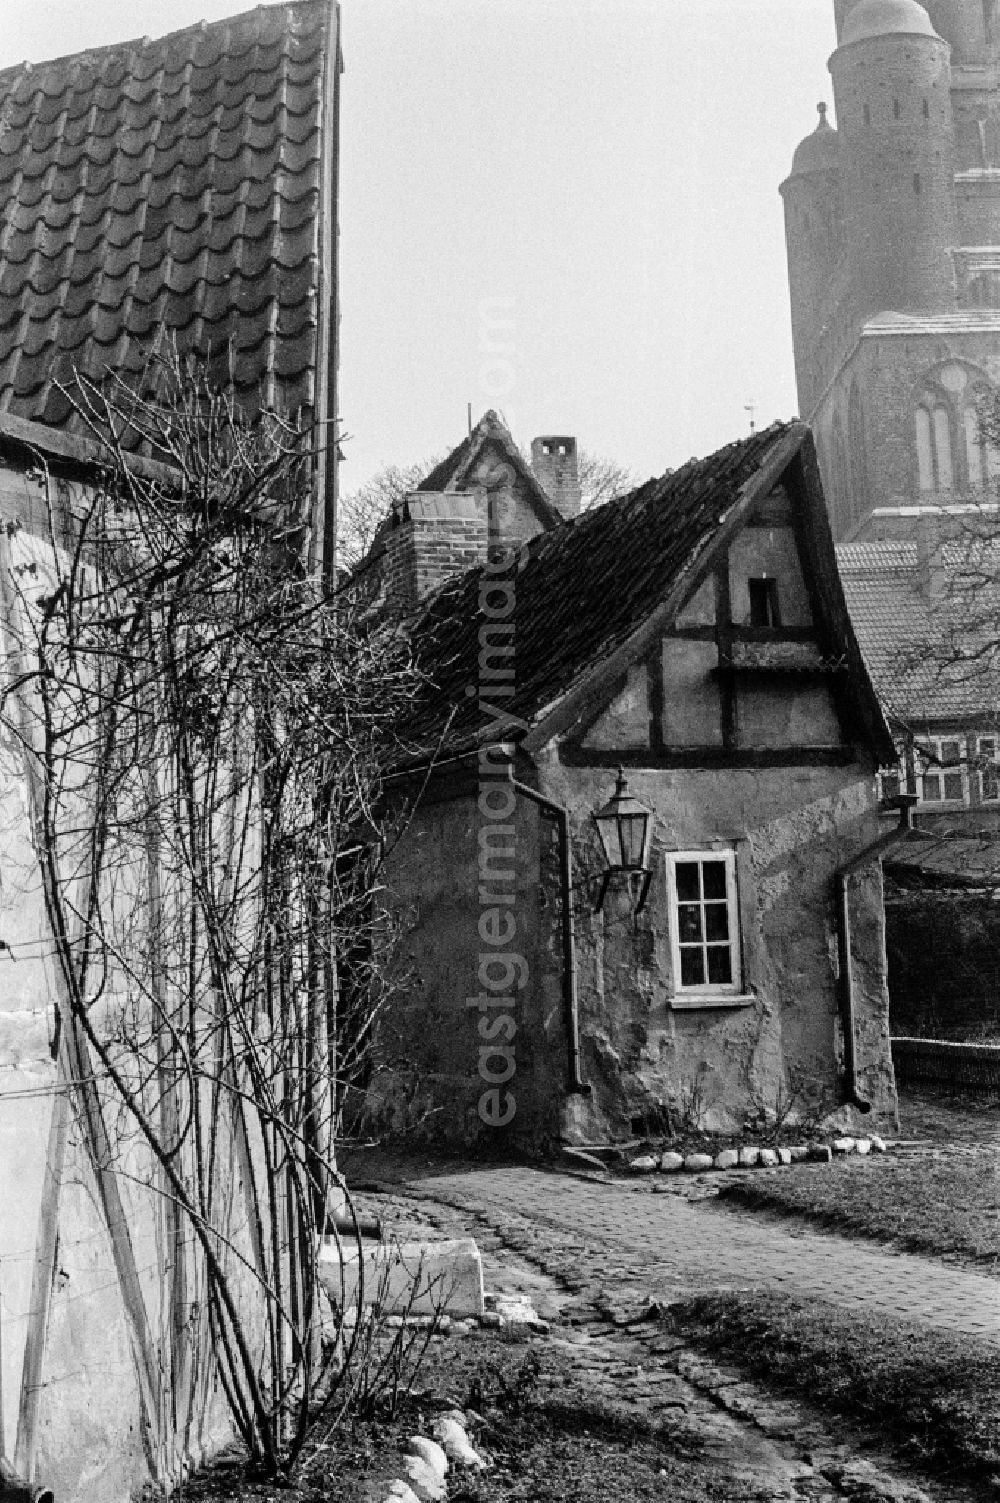 GDR image archive: Greifswald - Half-timbered facade and building front on street Lange Strasse Sankt Spiritus in Greifswald, Mecklenburg-Western Pomerania on the territory of the former GDR, German Democratic Republic